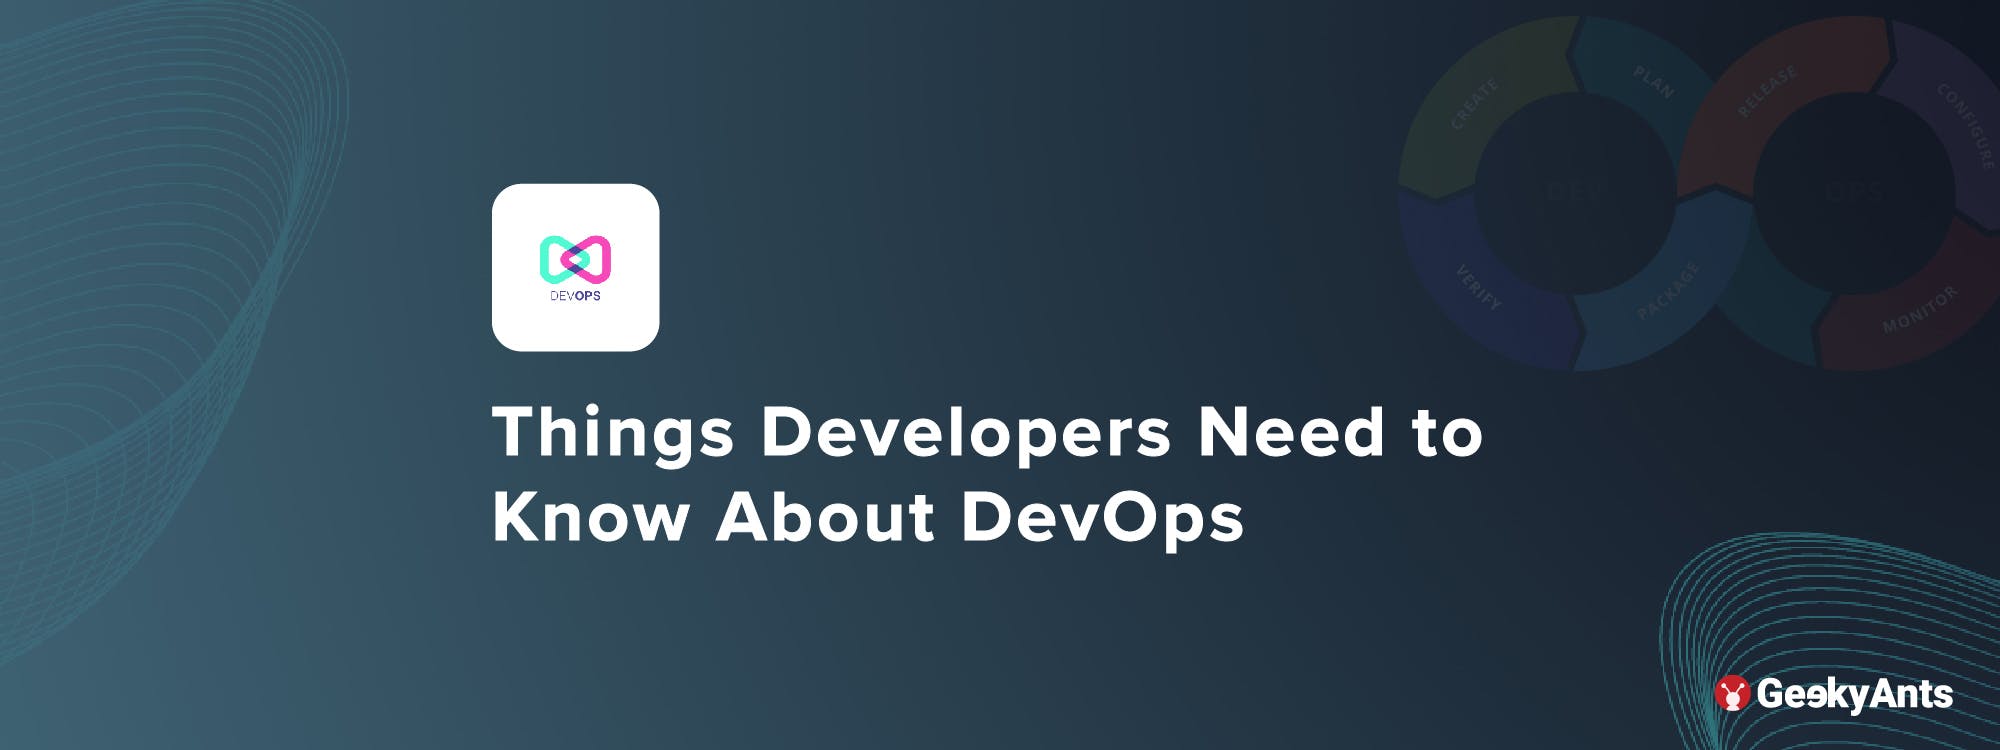 Things Developers Need to Know About DevOps